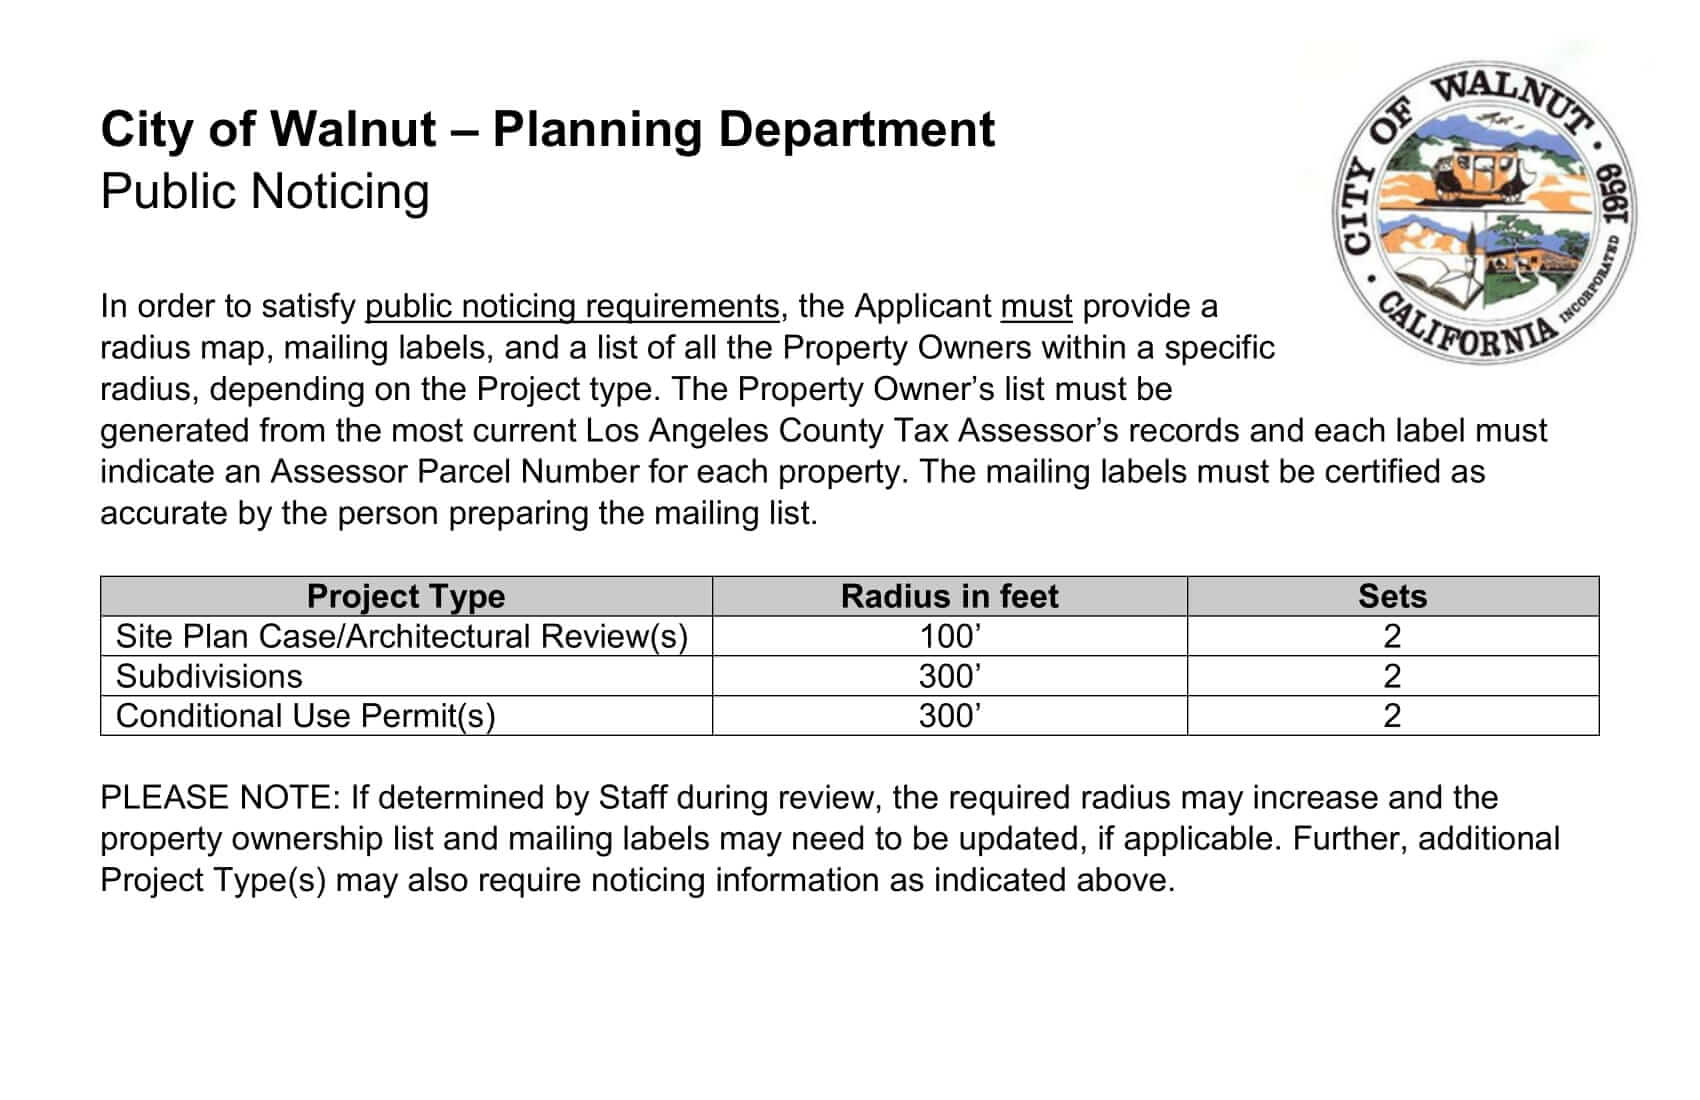 City of Walnut Planning Department Public Noticing.provide mailing labels of neighboring properties of at least one-hundred (100') feet or three-hundred (300’) feet around the Subject Property along with a radius map indicating the specific parcels being notified 